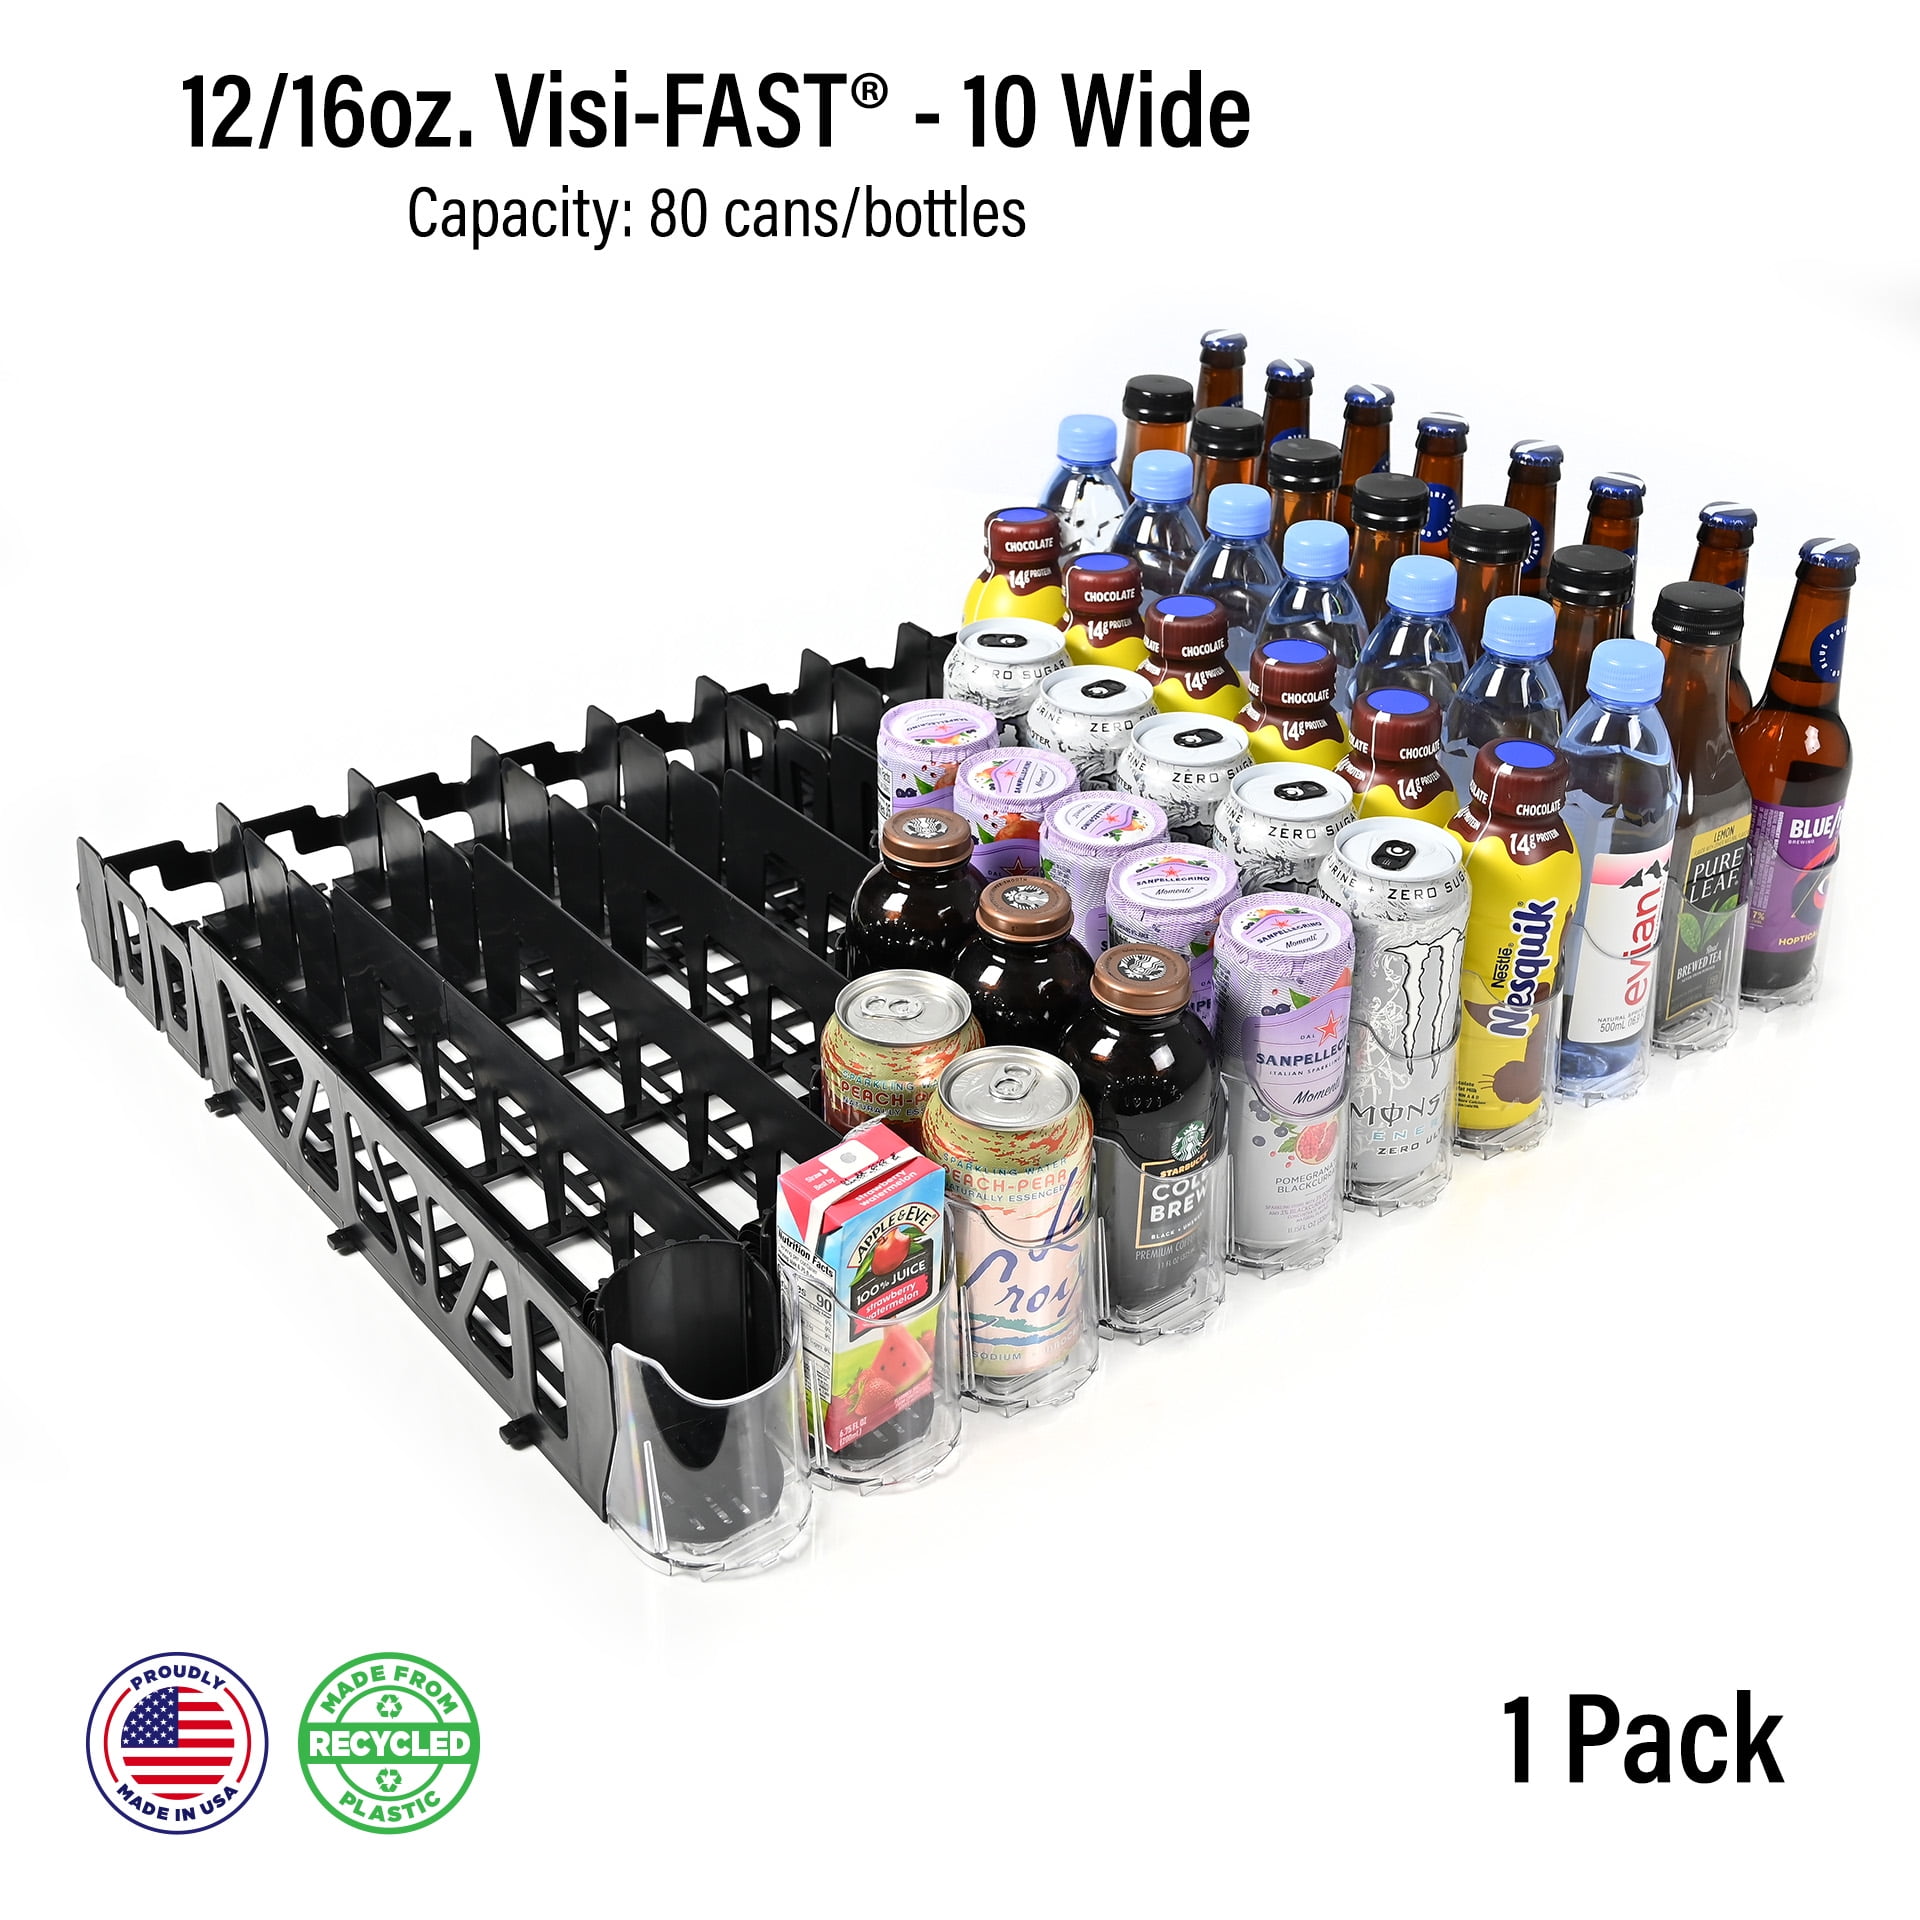 Display Technologies Visi-FAST (Pack of 1) Drink Can Organizer for fridge,  Pusher Glide, 12 oz, 16oz Soda Can Water Bottle Storage for Refrigerator,  Kitchen, Pop Soda Can Dispenser 